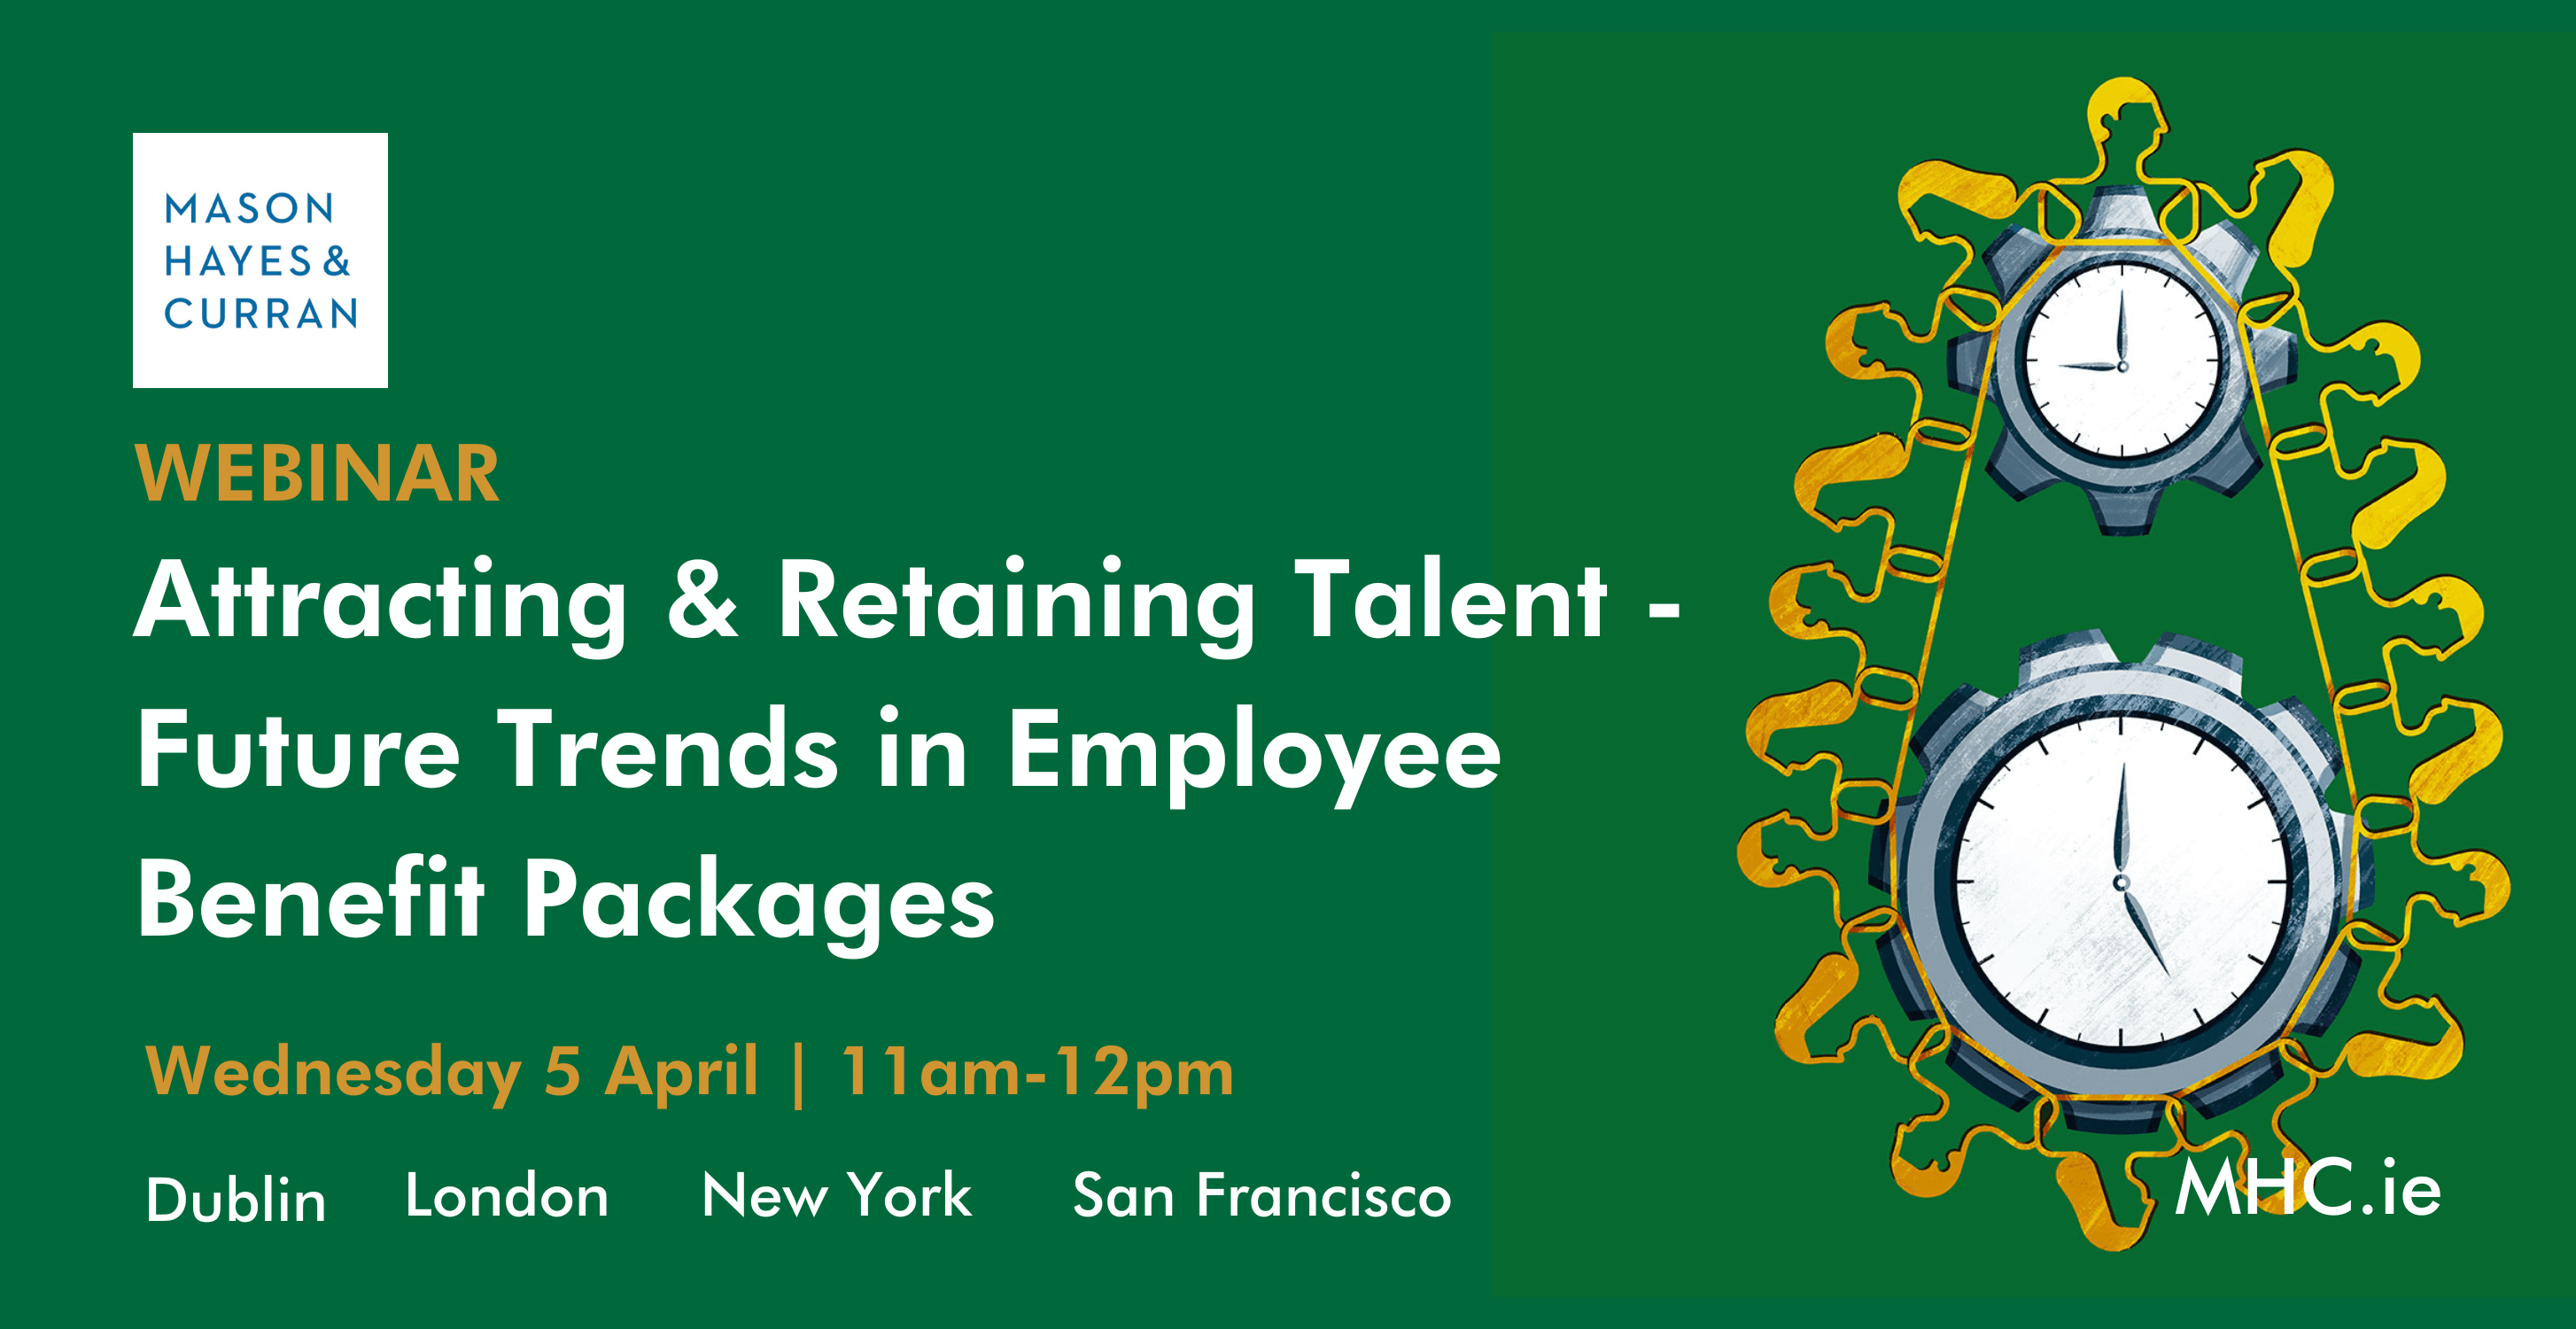 ttracting & Retaining Talent - Future Trends in Employee Benefit Packages